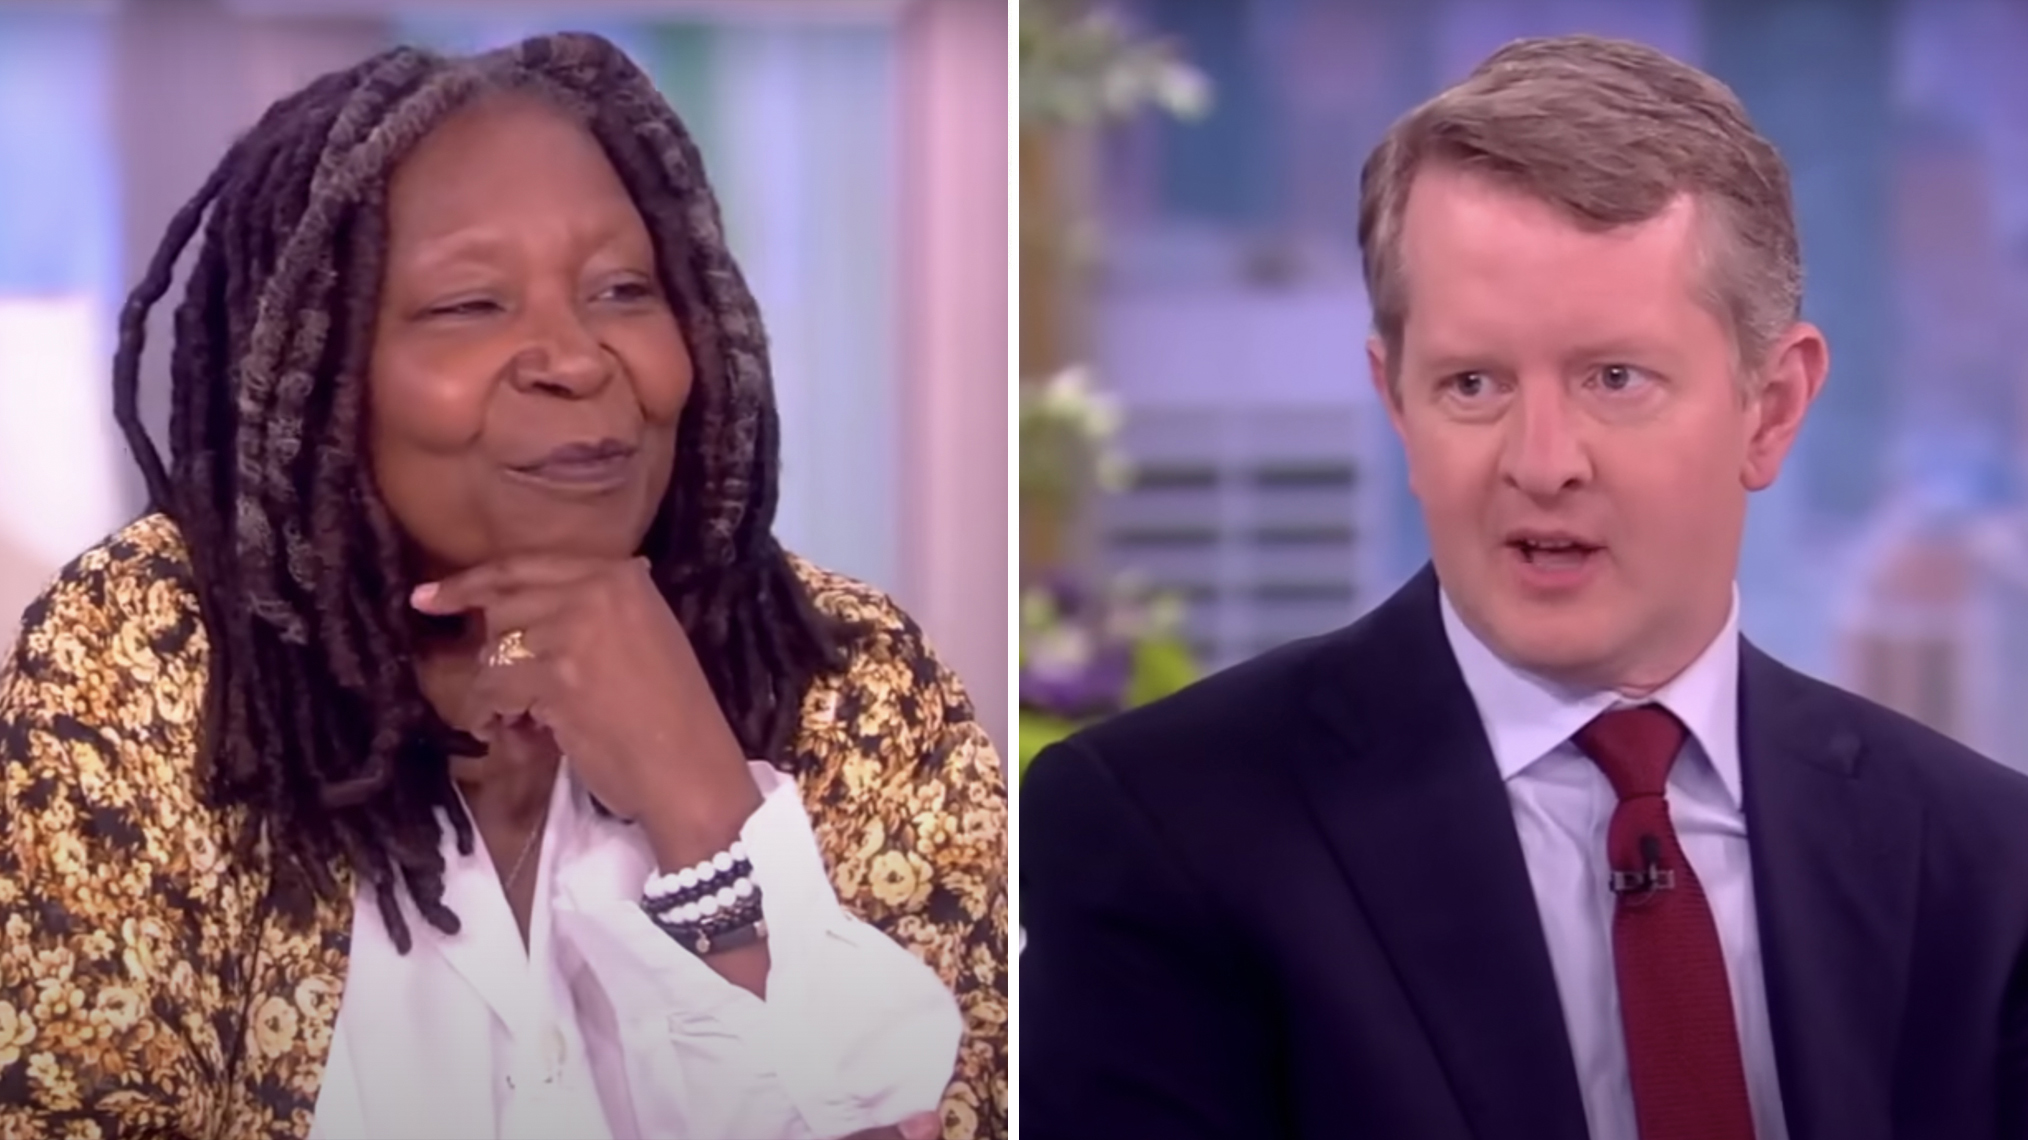 whoopi goldberg wants to host “wheel of fortune” and ken jennings steps in